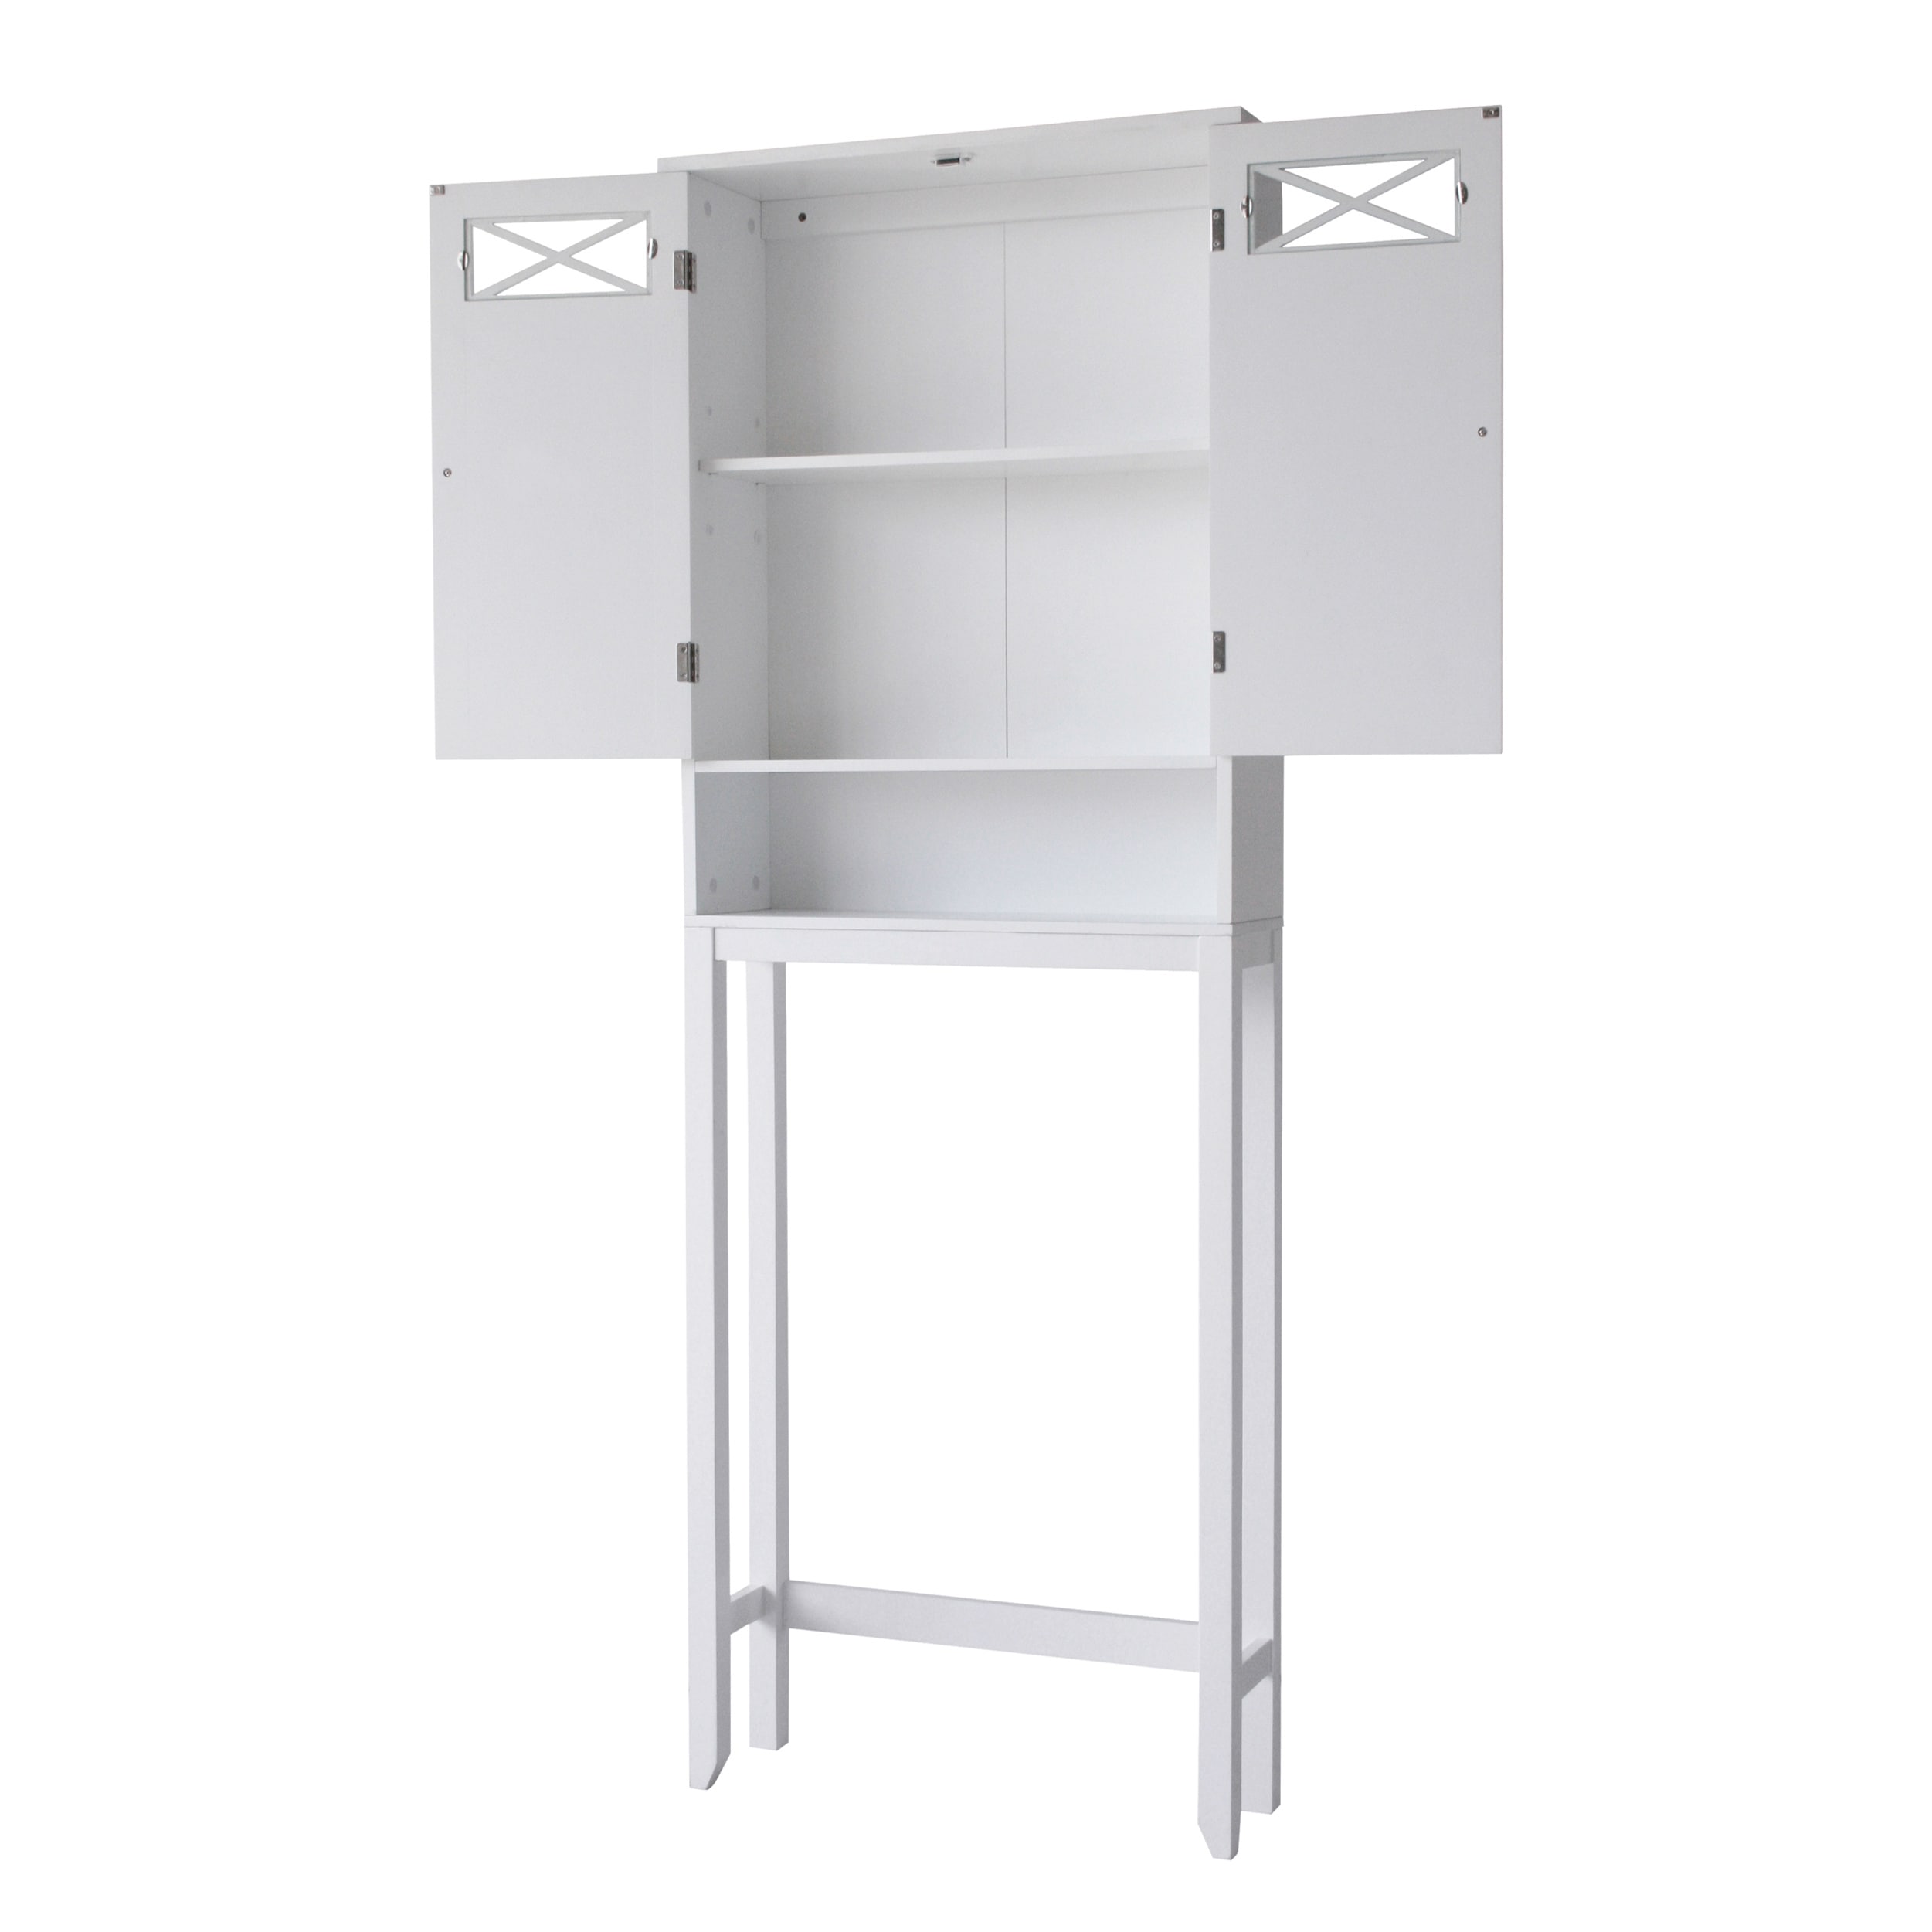 Costway Wooden Over The Toilet Storage Cabinet Spacesaver